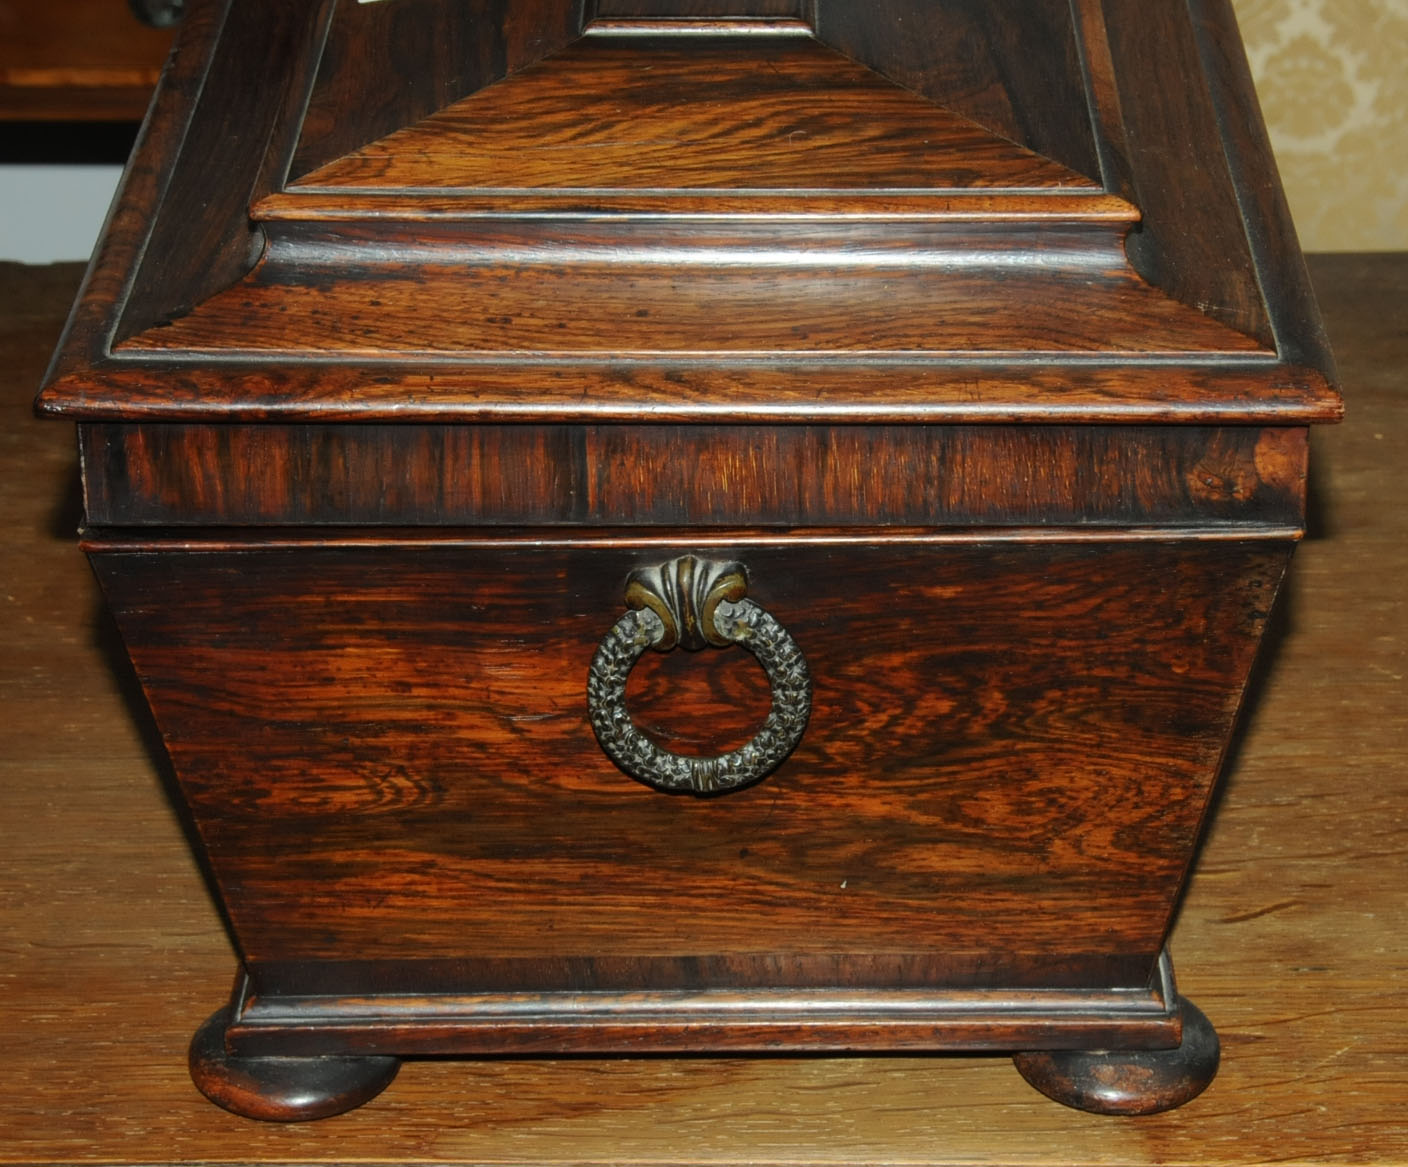 A Regency rosewood table box, with bronze handles, sarcophagus form with interior fitted for sewing. - Image 6 of 10